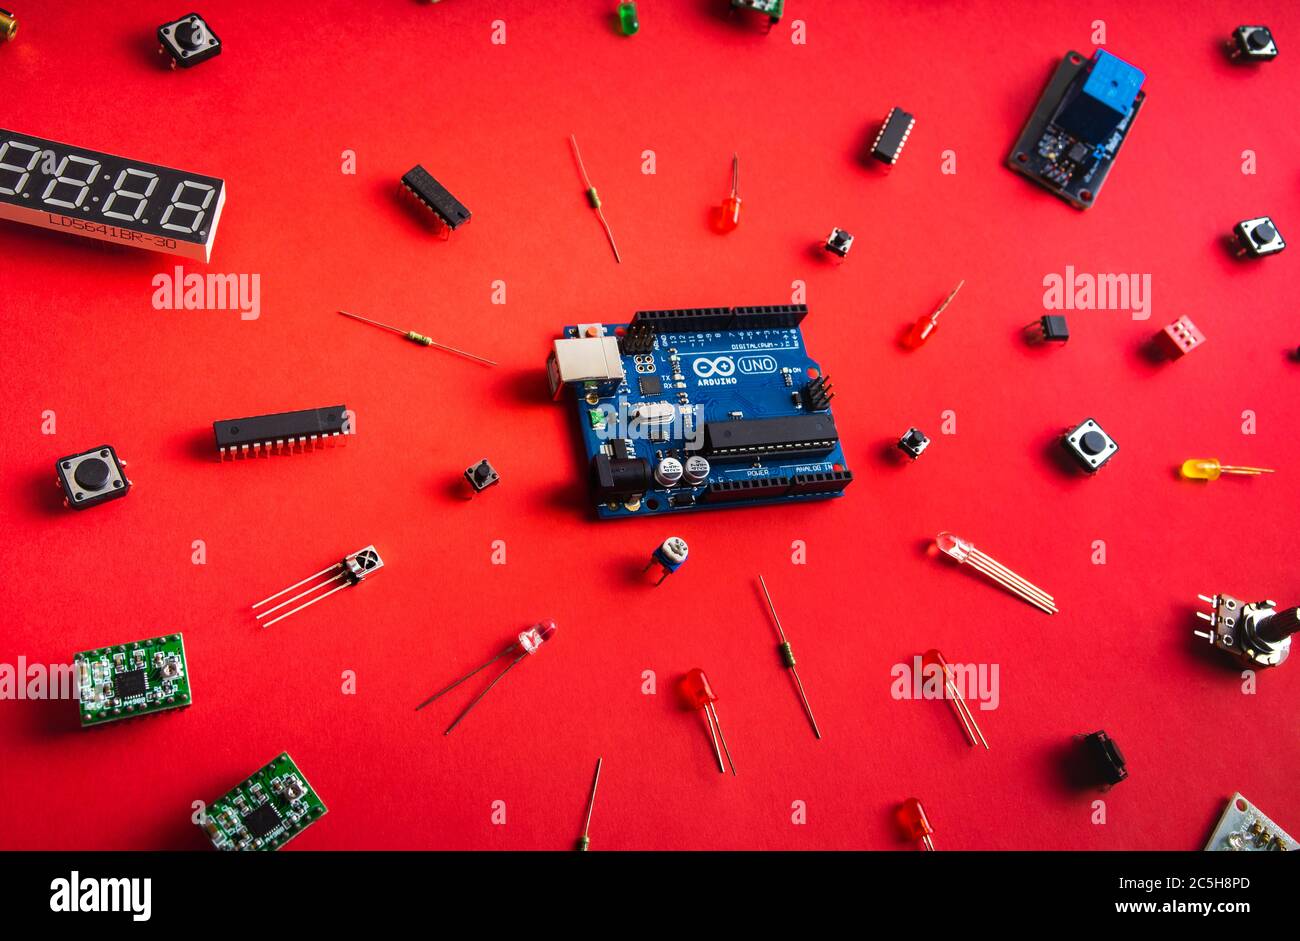 Sankt-Petersburg, Russia - February 28, 2020: Arduino UNO board over red background. Microcontrollers, boards, sensors, leds, controllers, Microcontro Stock Photo